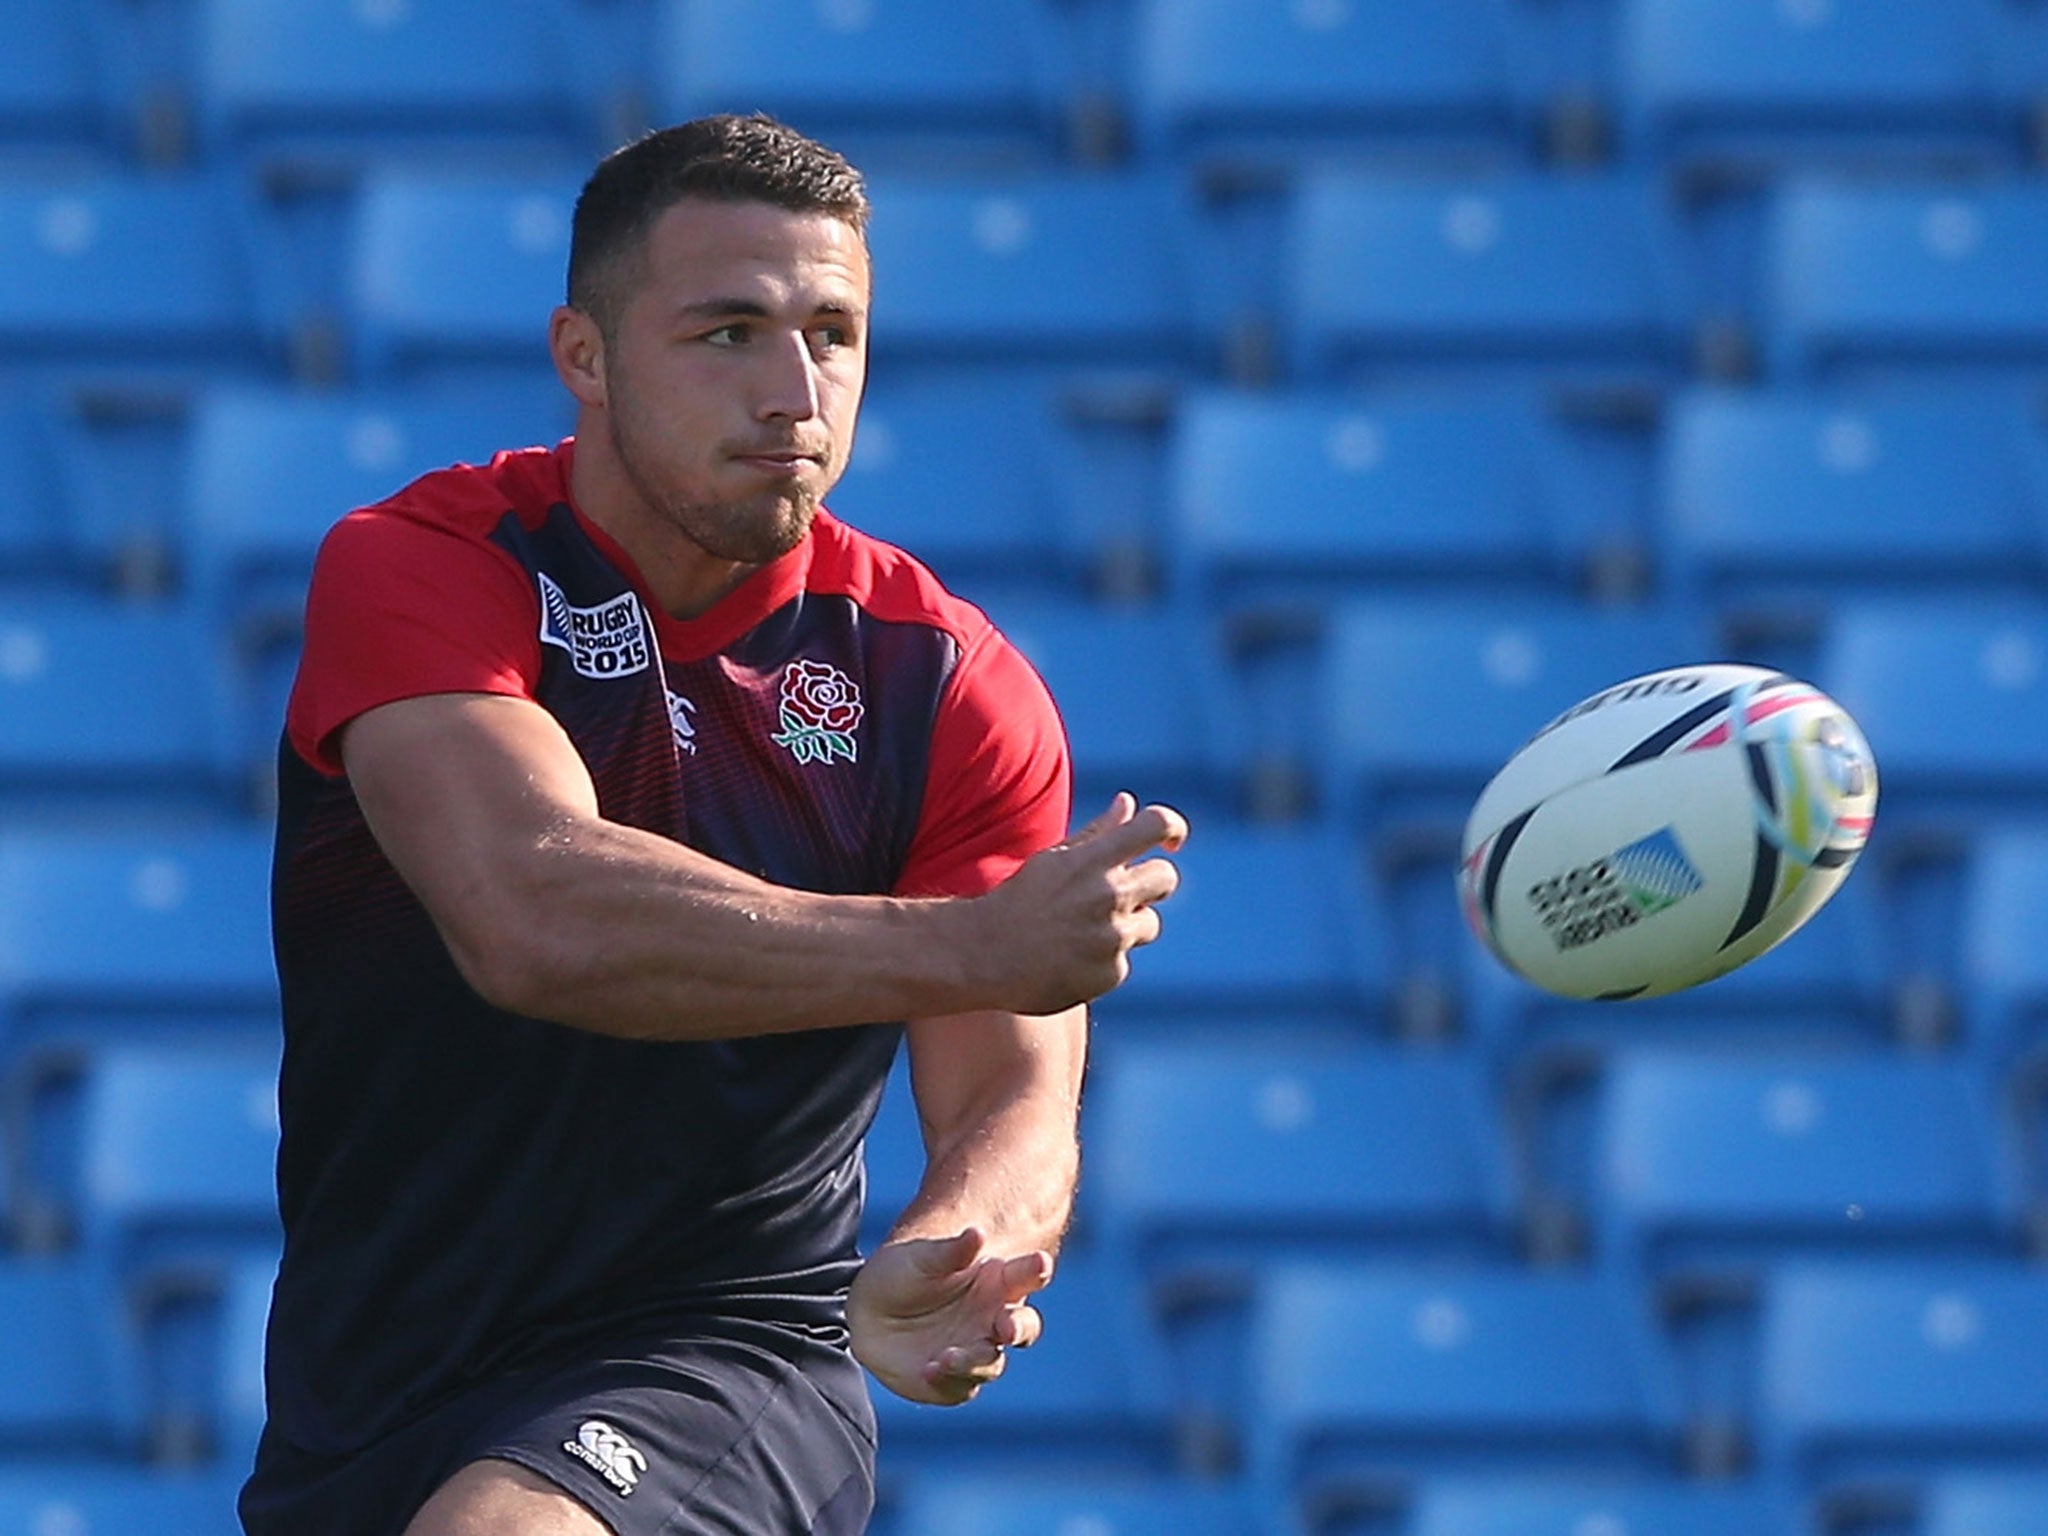 Burgess faced a wave of criticism after England's Rugby World Cup exit